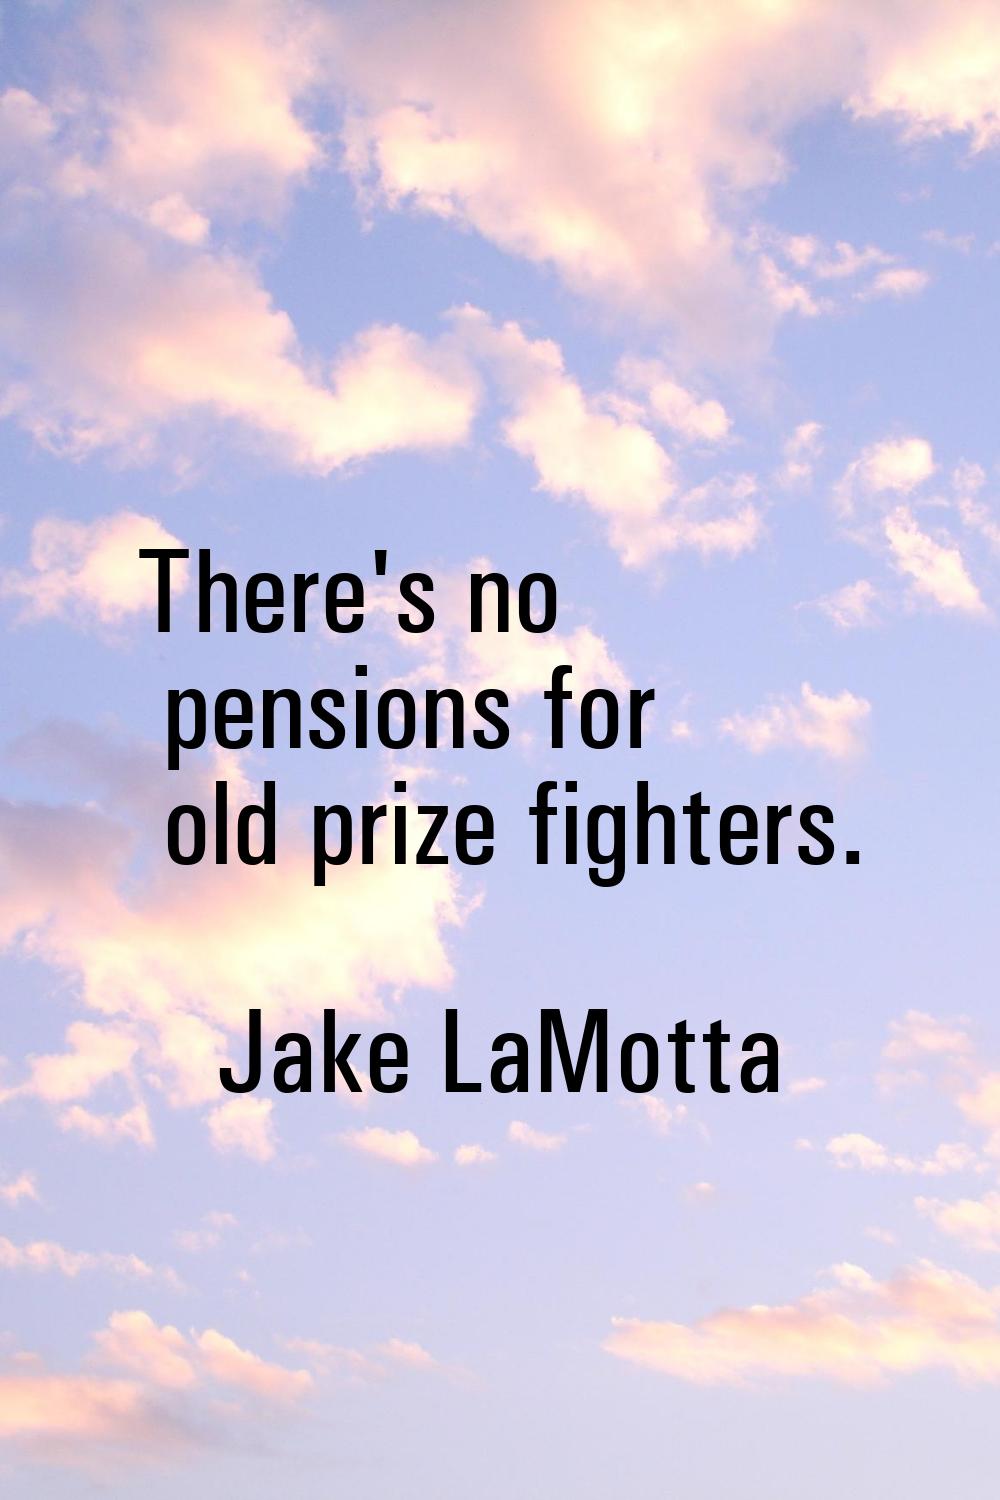 There's no pensions for old prize fighters.